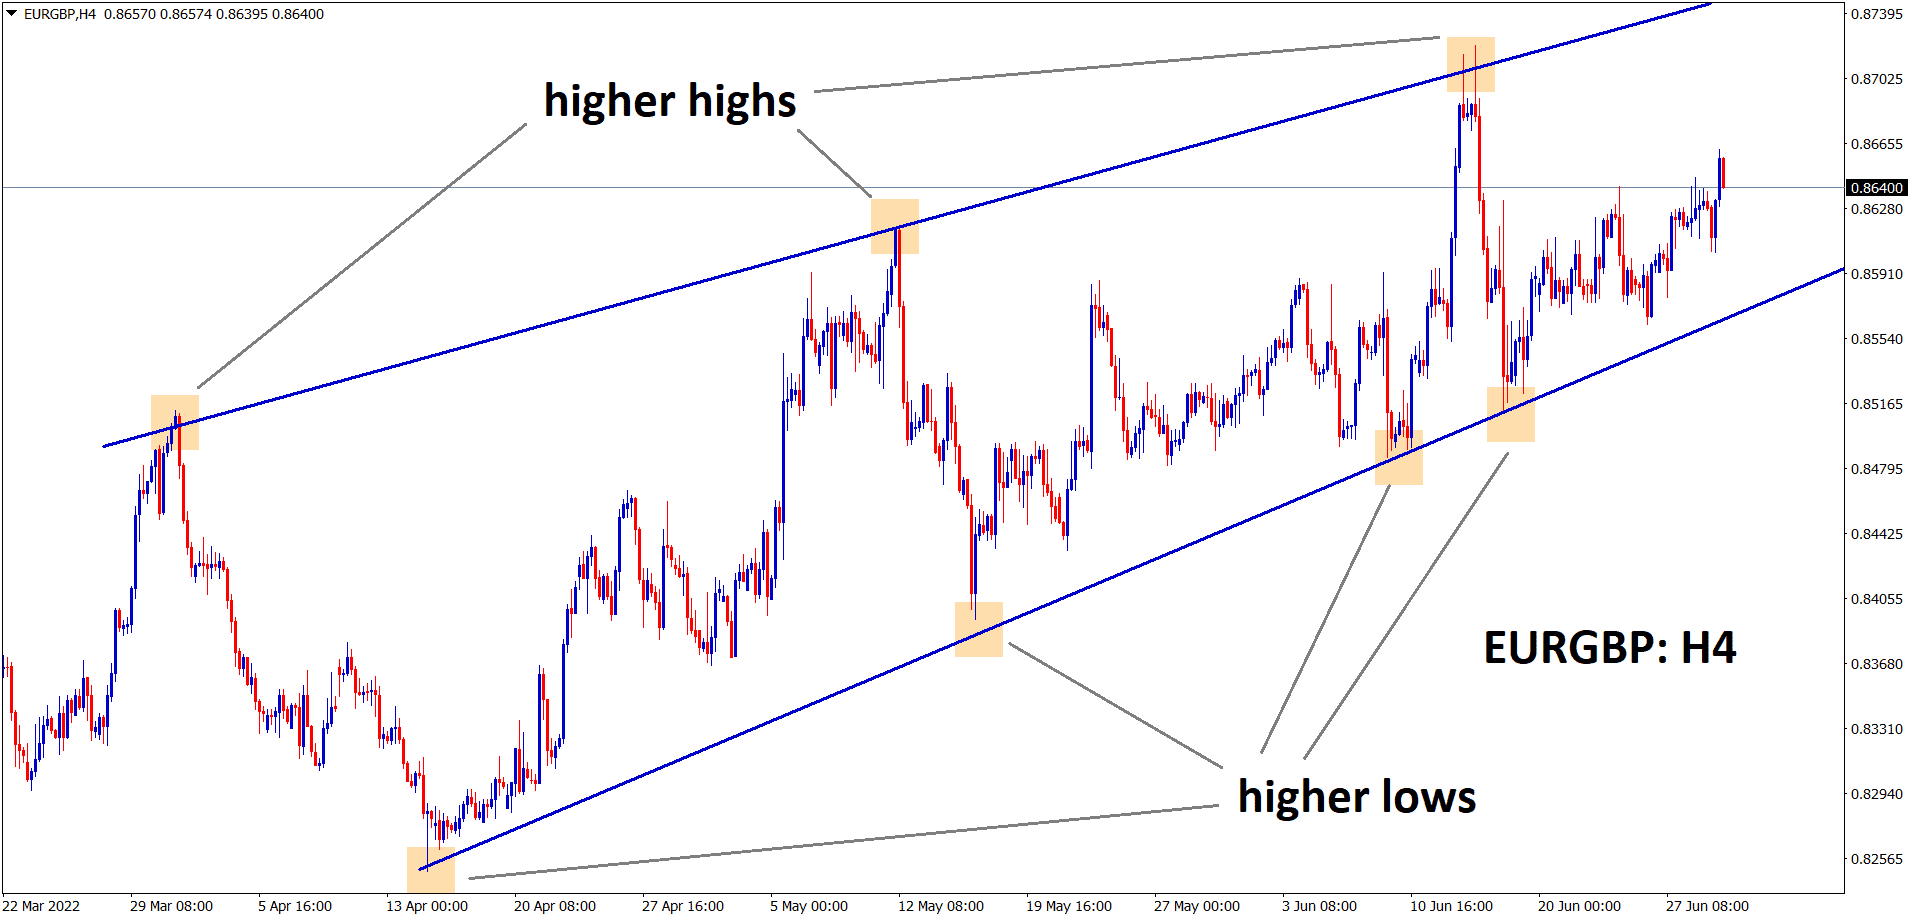 EURGBP is moving in an uptrend